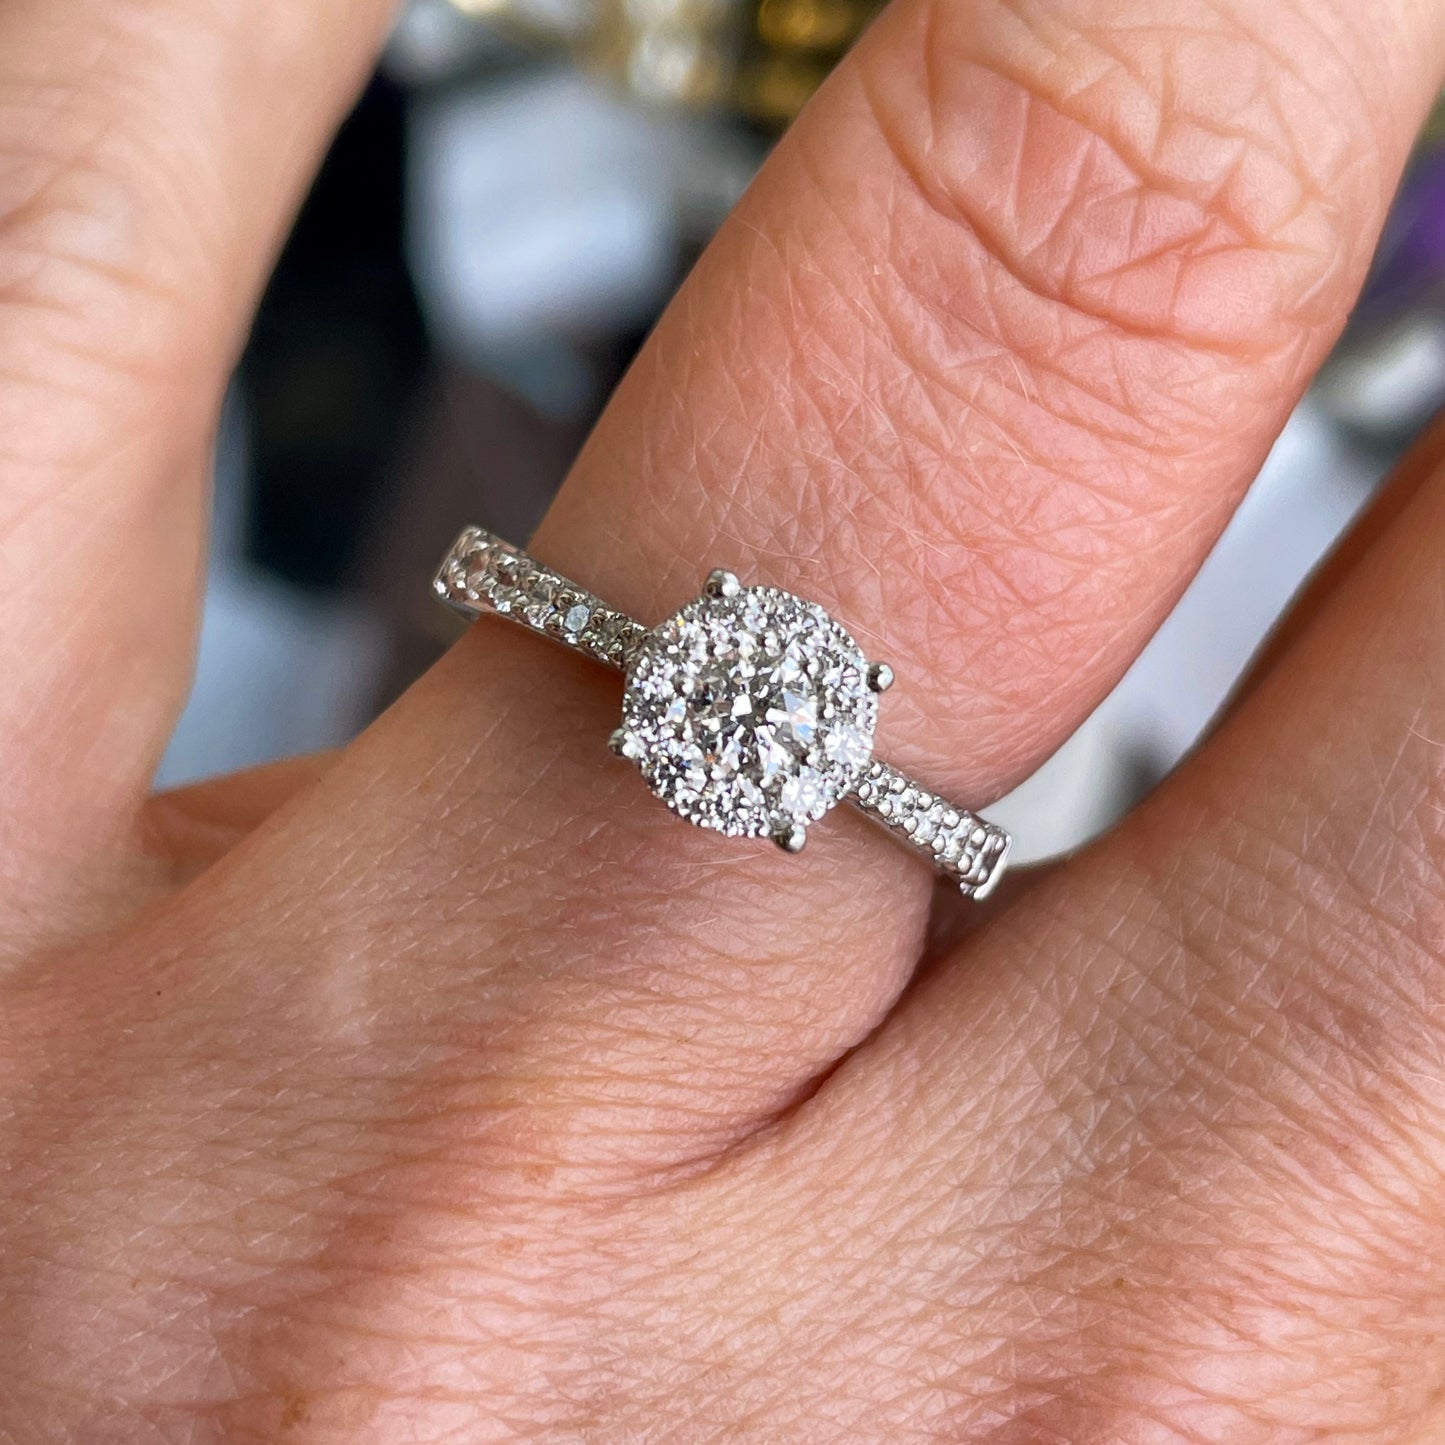 This solitaire cluster diamond engagement ring is a complete classic.  Its simplicity is so romantic.  The Details...  One 18ct white gold diamond engagement ring.  Cluster of brilliant cut diamonds.  0.65ct HSI  18ct white gold.  